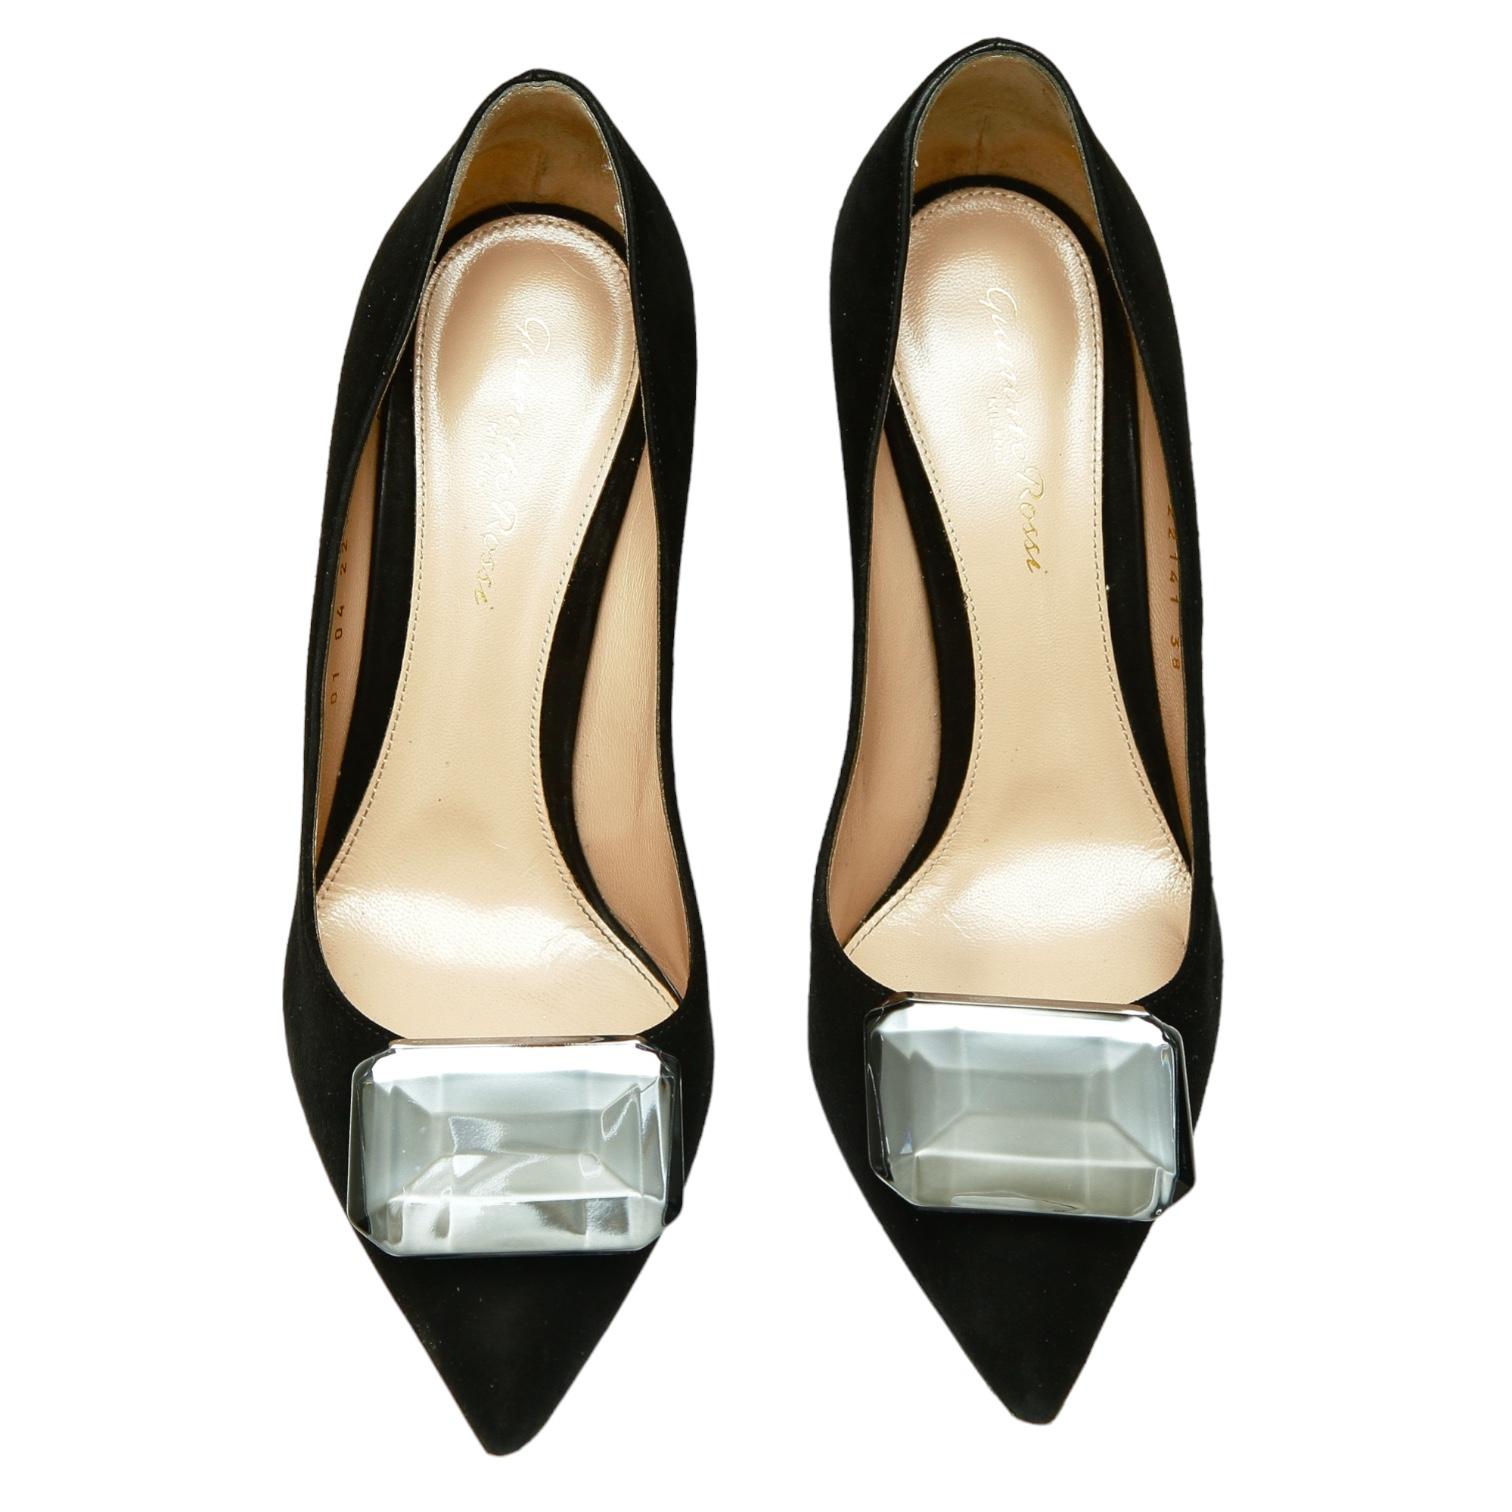 GIANVITO ROSSI Black Suede Leather Pump JAIPUR Crystal Pointed Toe 38 $1200 For Sale 1